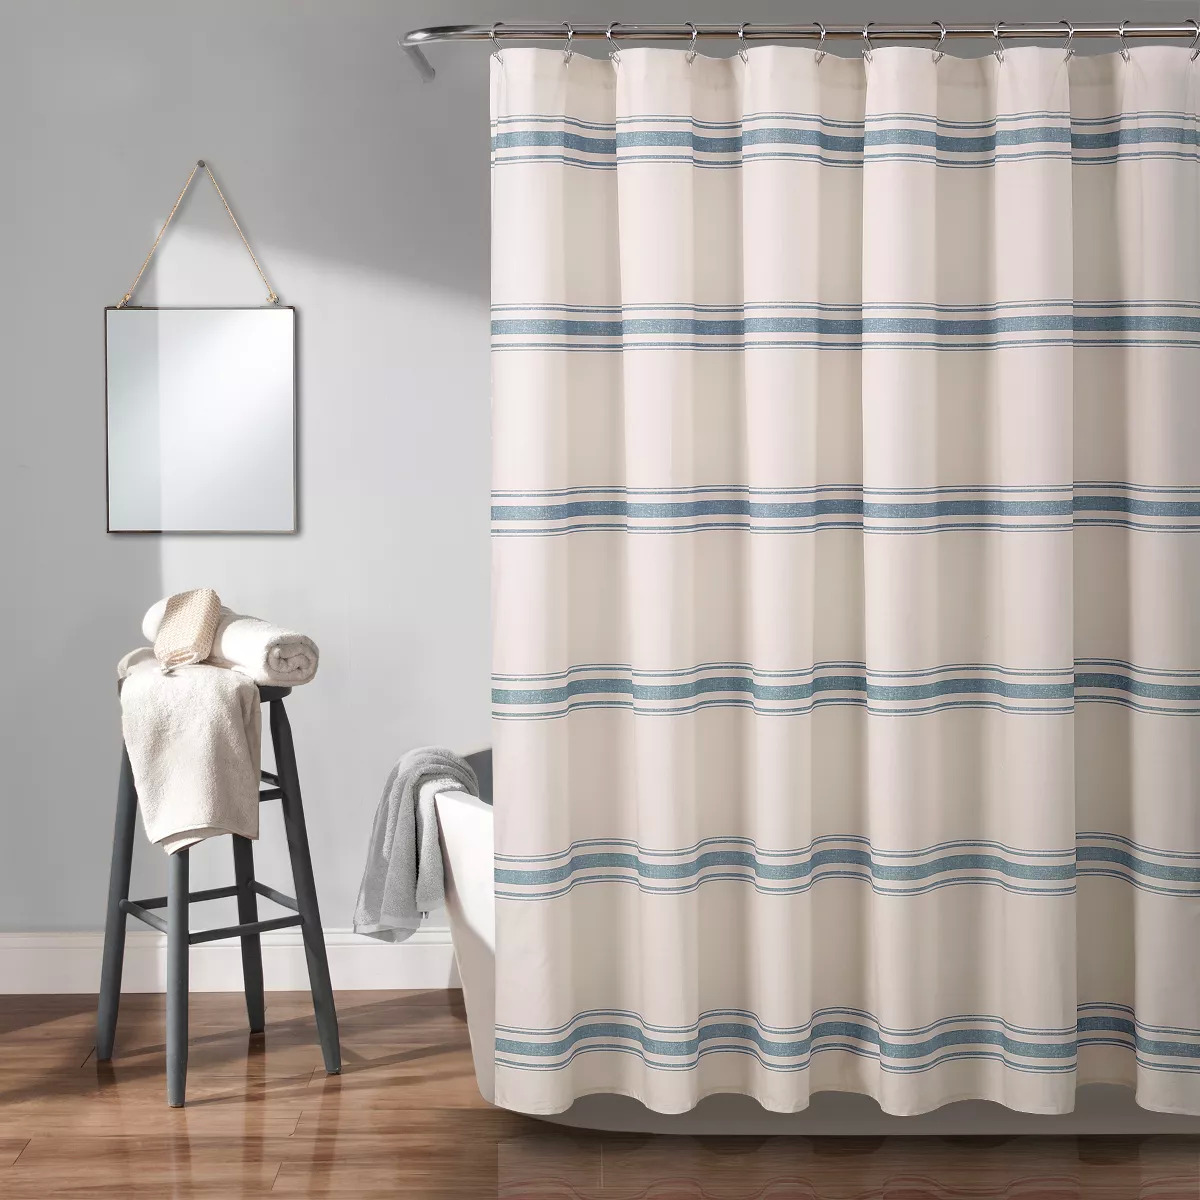 Lush Decor Shower Curtains: Umbre Fiesta (Pale Blush) $4.19 Farmhouse Striped $4.49 & More + Free Store Pickup at Target or FS on $35+